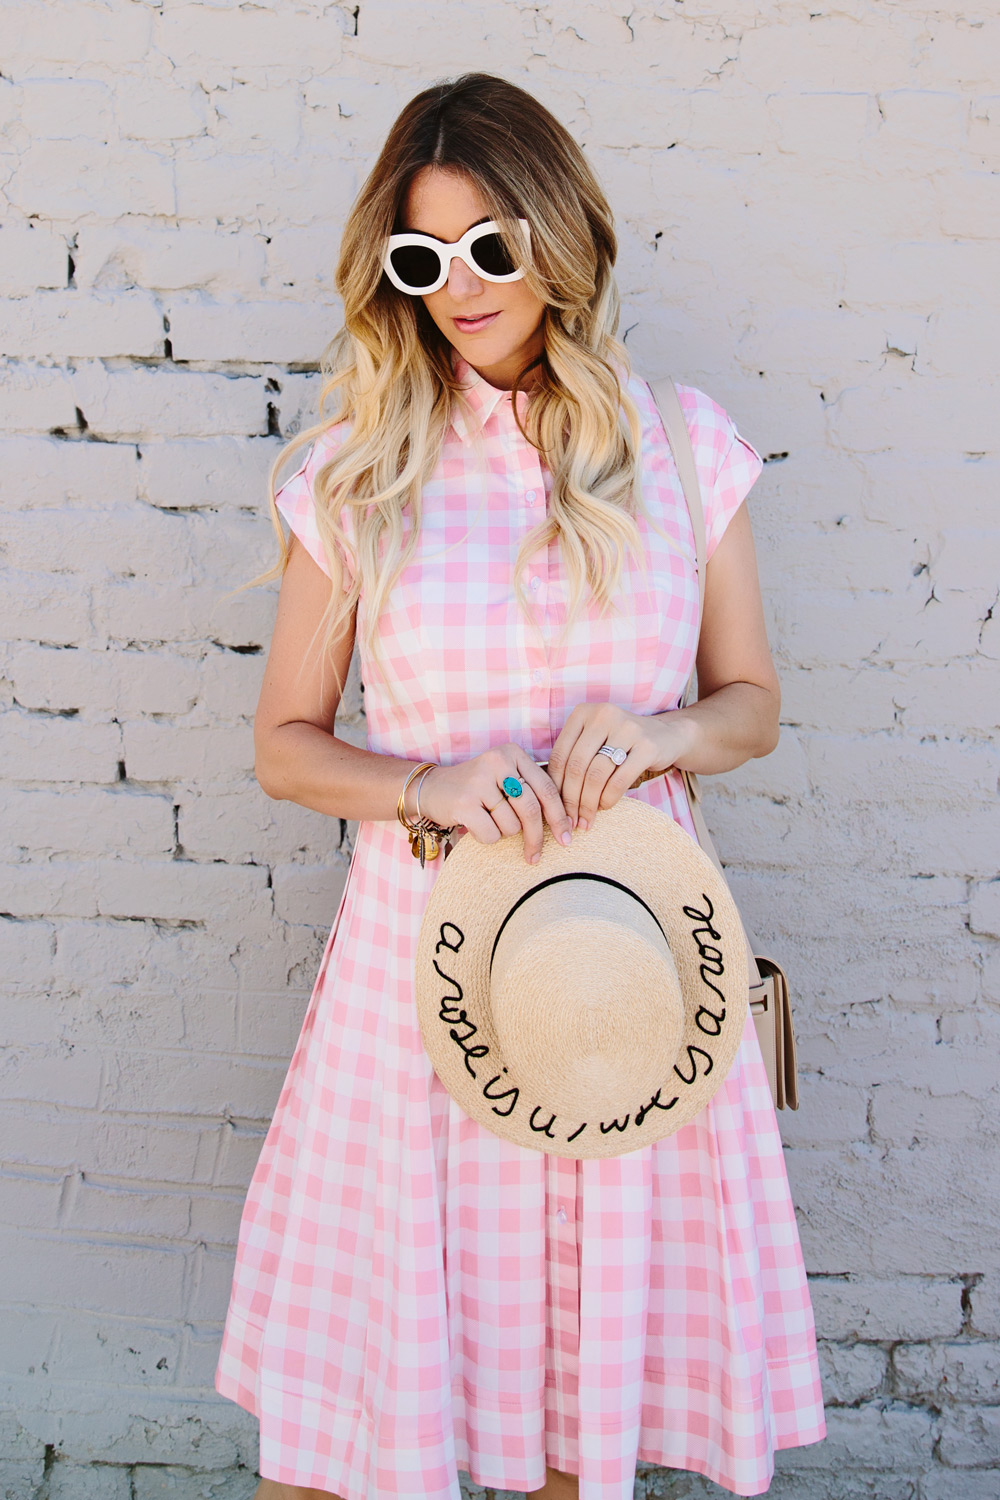 Dash of Darling styles an Eliza J gingham pink checkered poplin dress from Nordstrom with an Eugenia Kim straw boater hat and white Celine sunglasses for the perfect summer outfit.